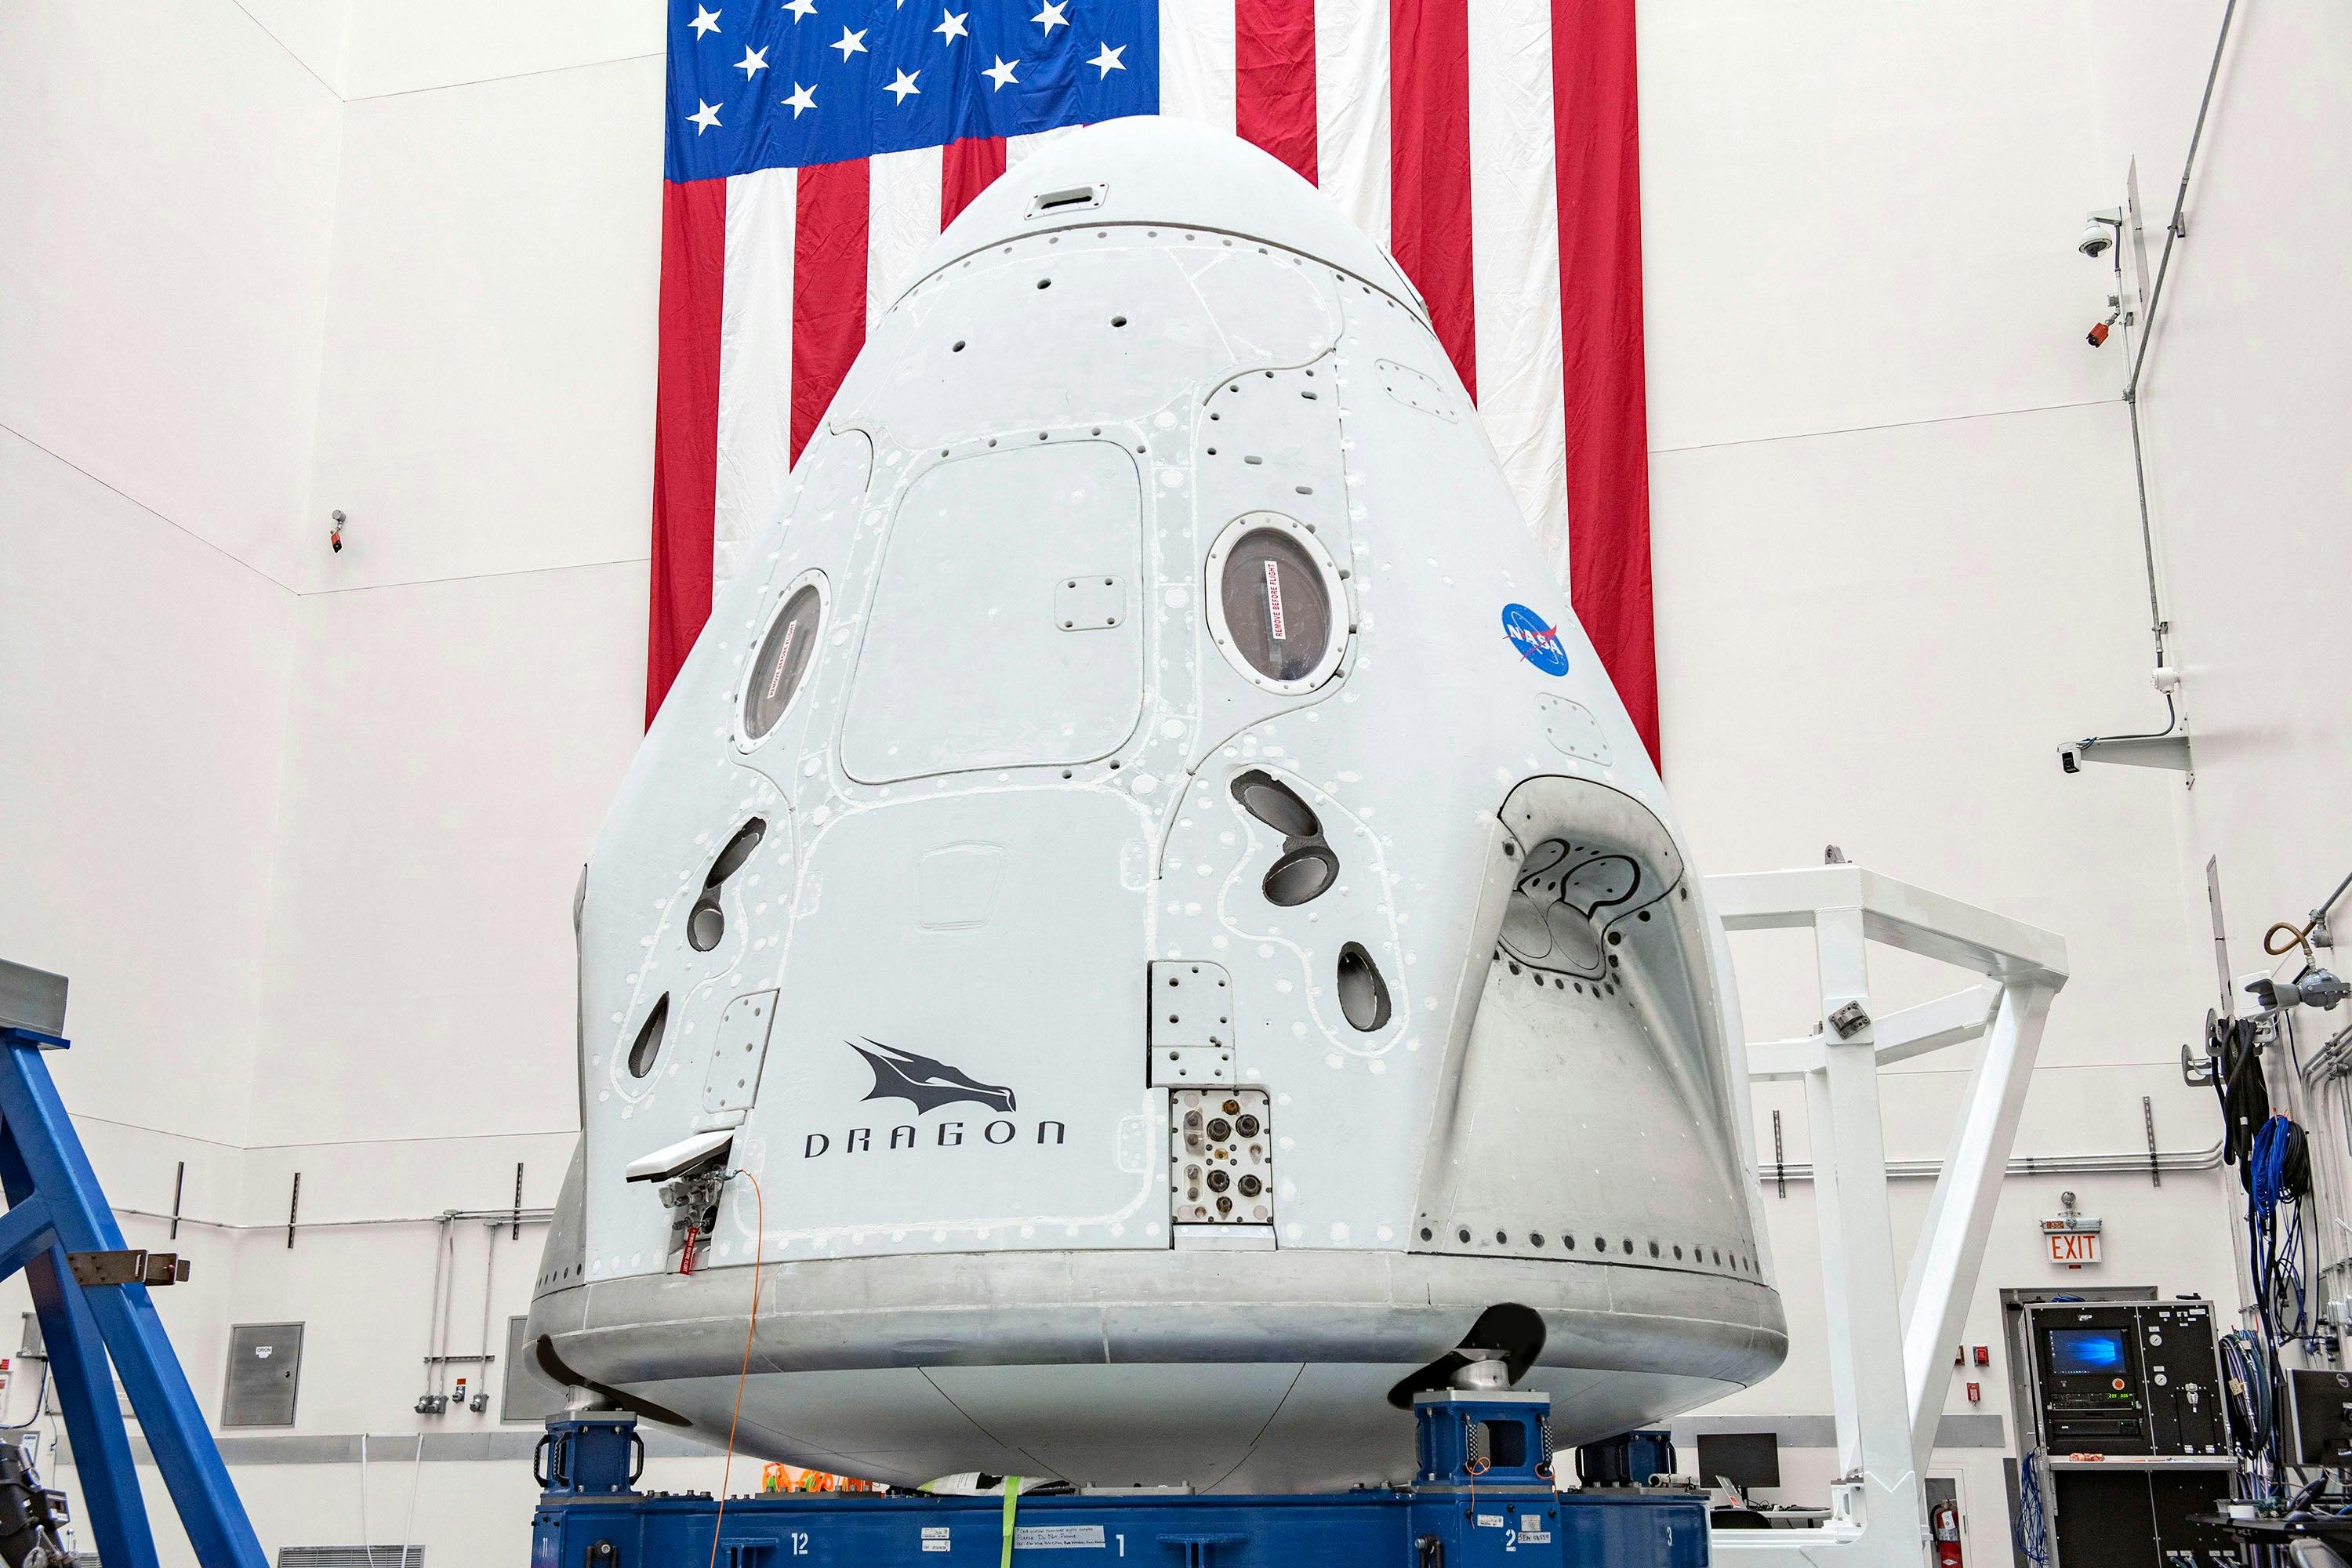 The SpaceX Crew Dragon spacecraft undergoes final processing at Cape Canaveral Air Force Station, Florida, in preparation for the Demo-2 launch with NASA astronauts Bob Behnken and Doug Hurley to the International Space Station for NASA’s Commercial Crew Program. Crew Dragon will carry Behnken and Hurley atop a Falcon 9 rocket, returning crew launches to the space station from U.S. soil for the first time since the Space Shuttle Program ended in 2011.